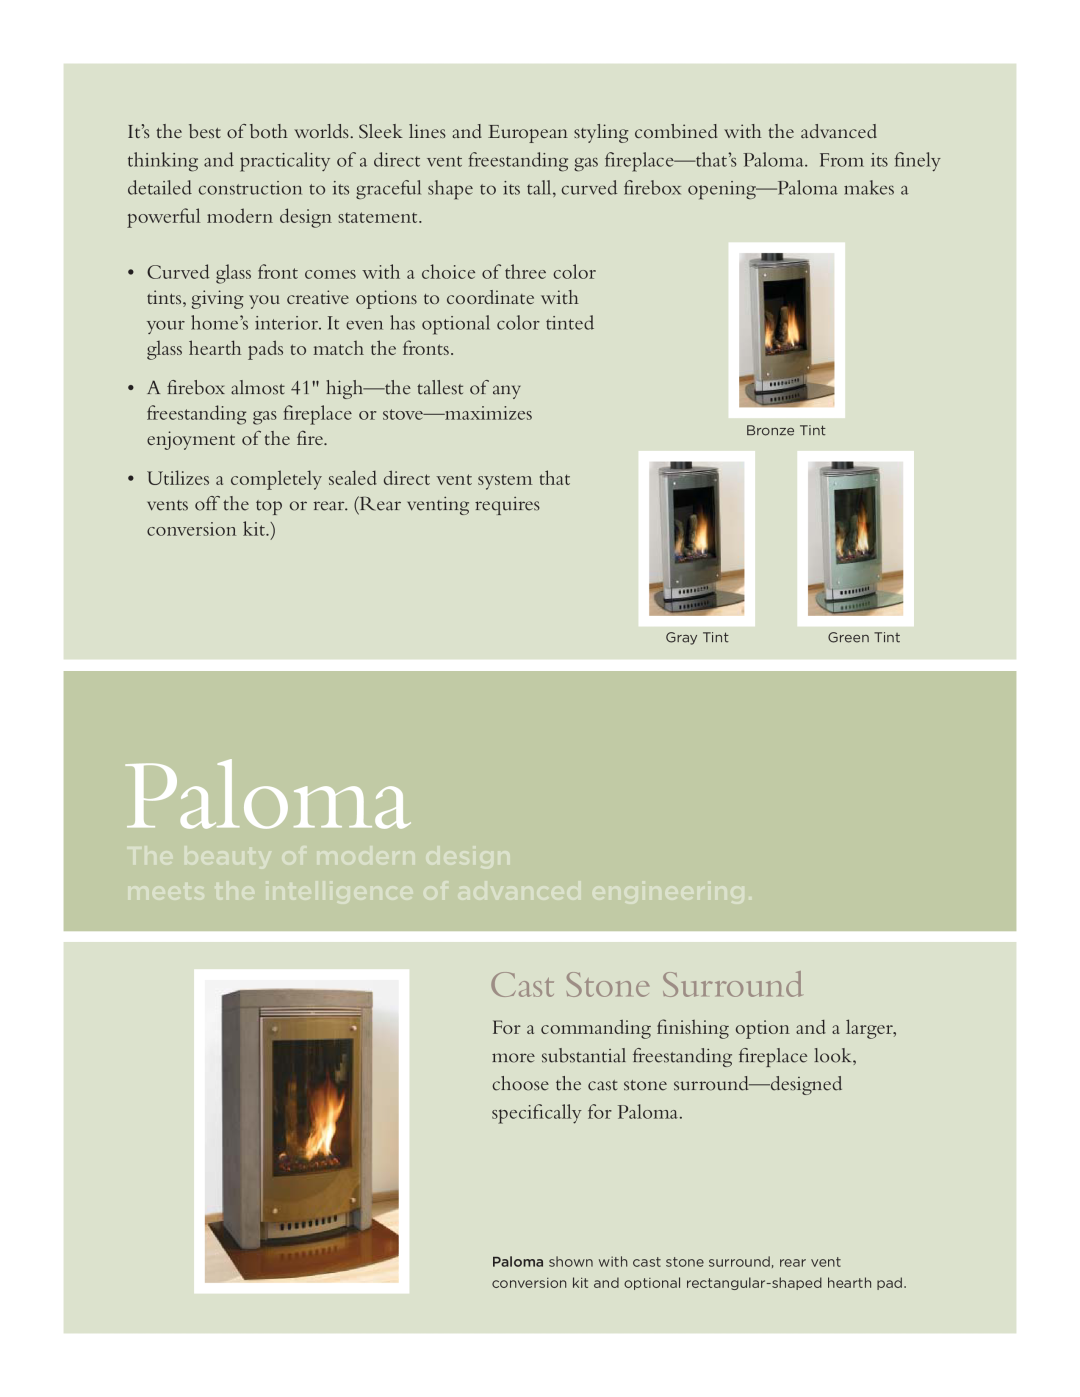 Hearth and Home Technologies Paloma manual Cast Stone Surround, The beauty of modern design 